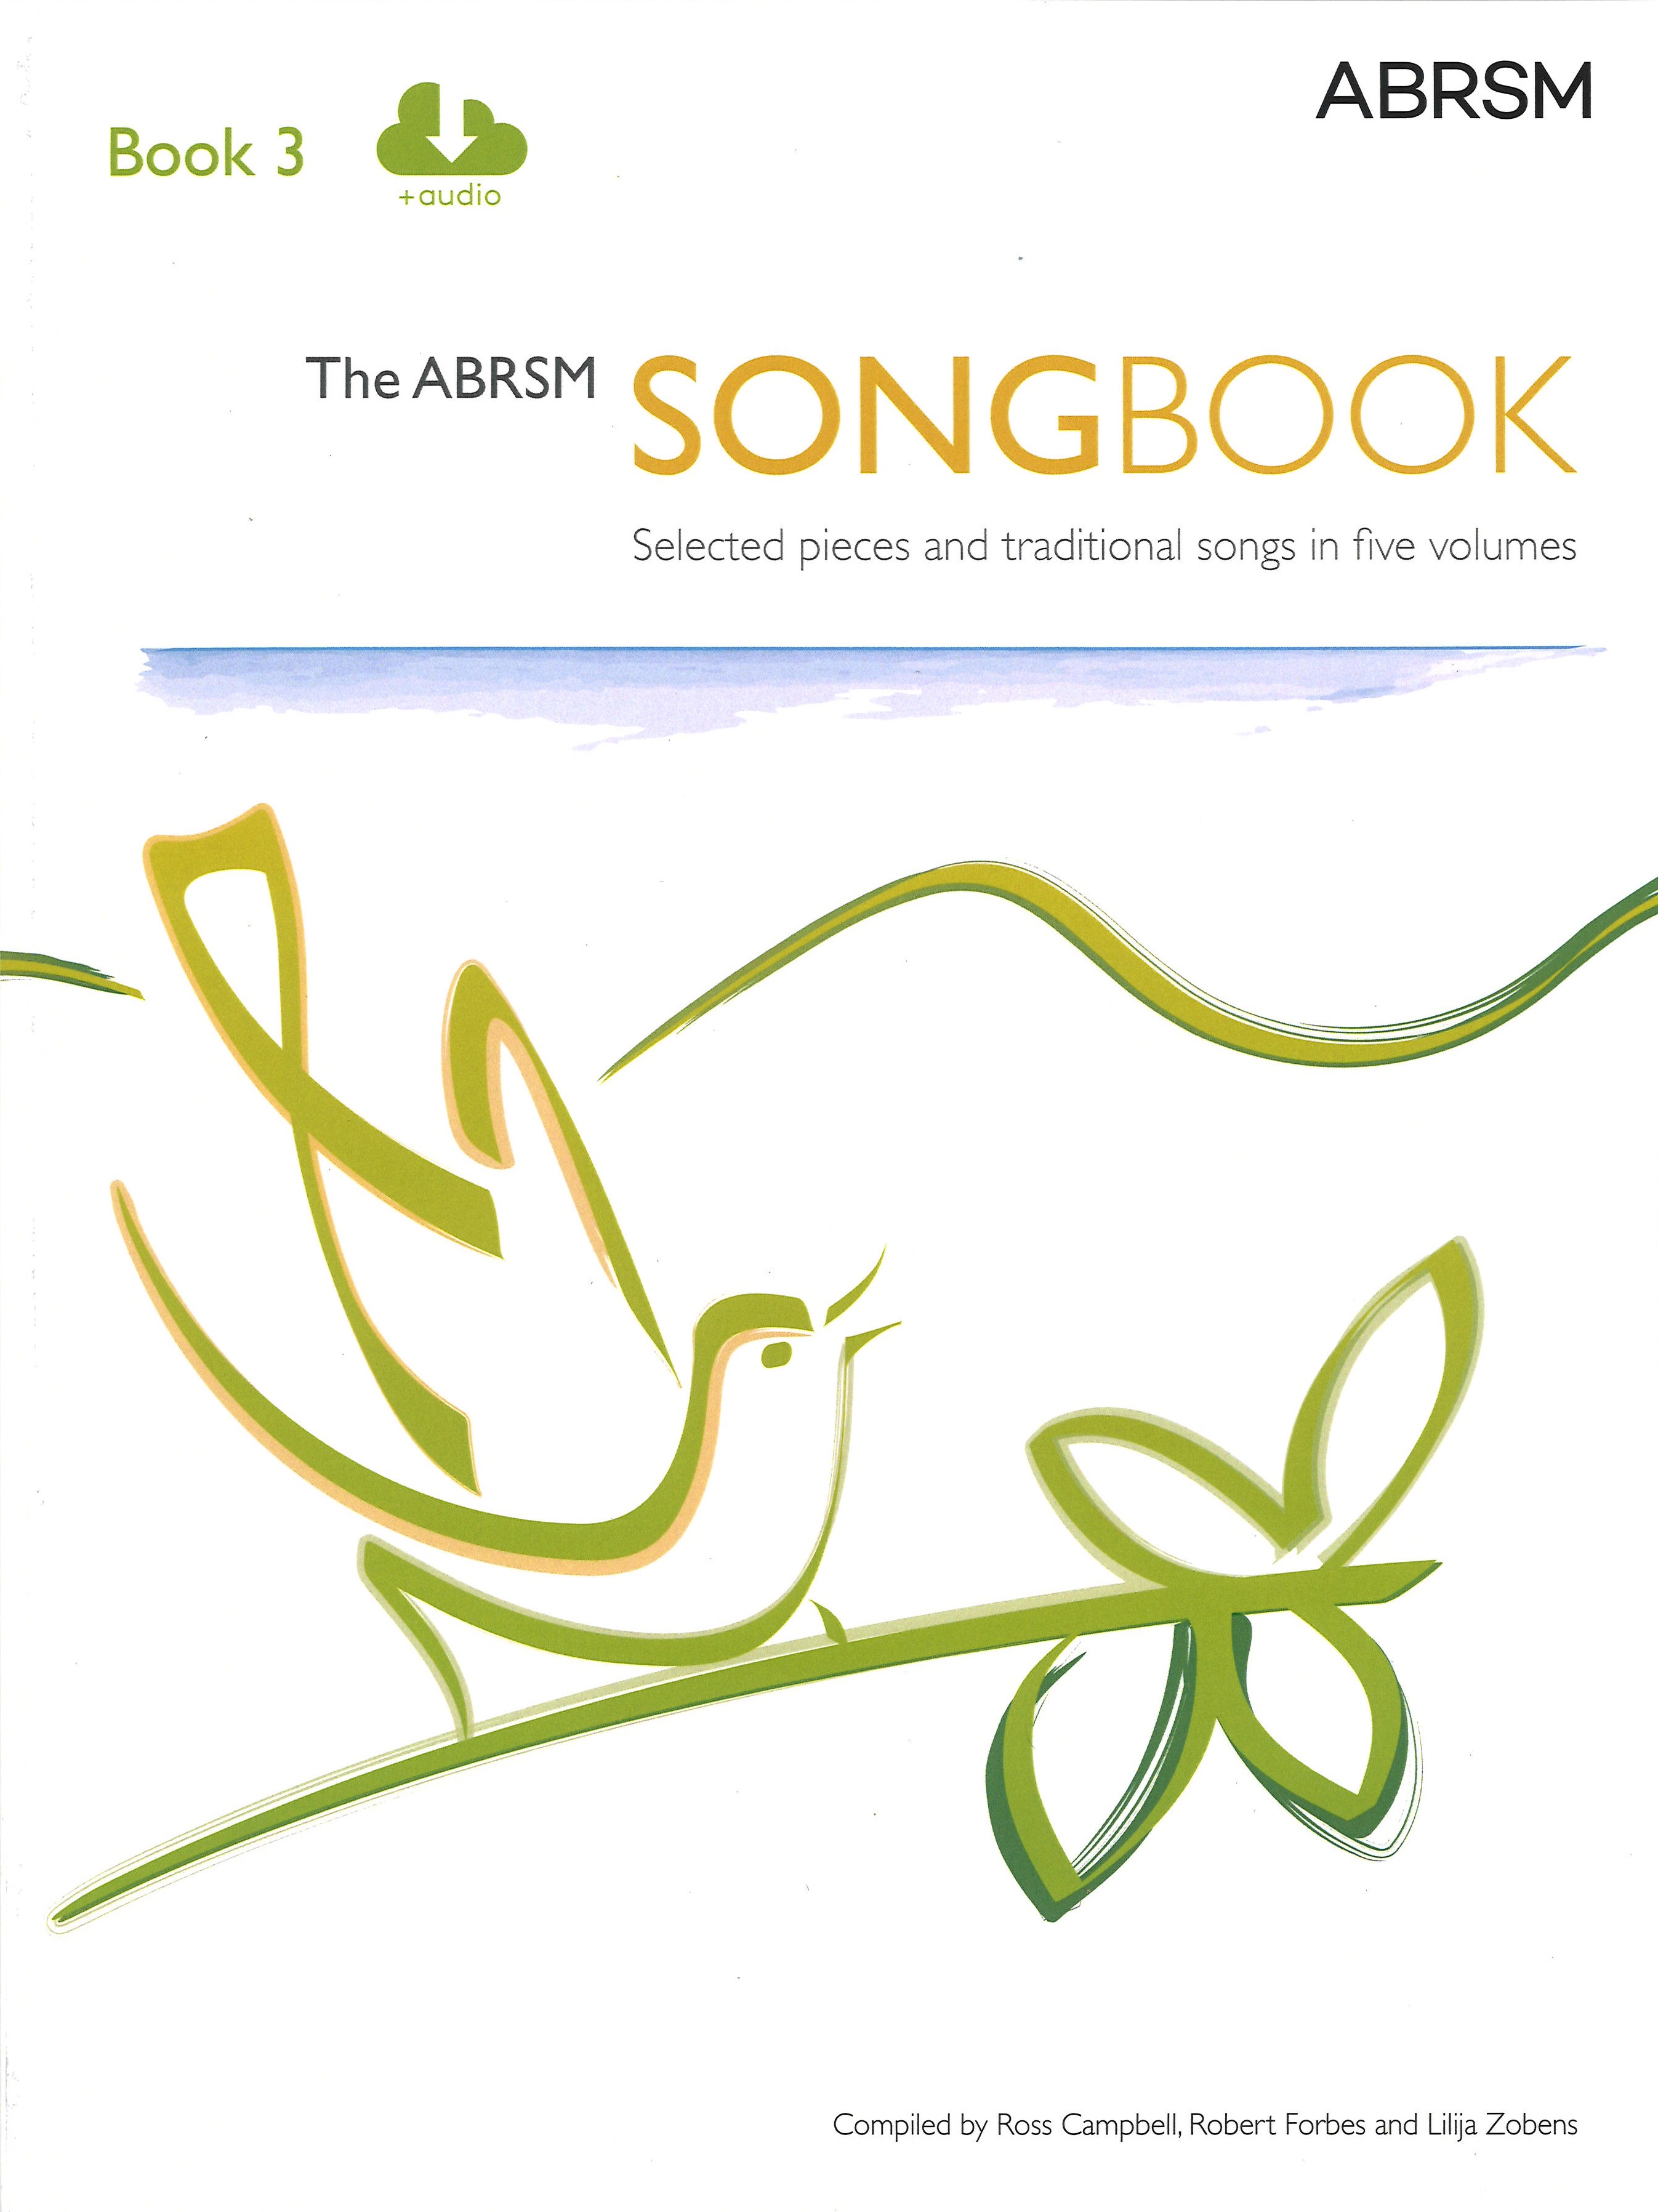  ABRSM          Songbook            3            +           CD    CD        Sheet Music Songbook